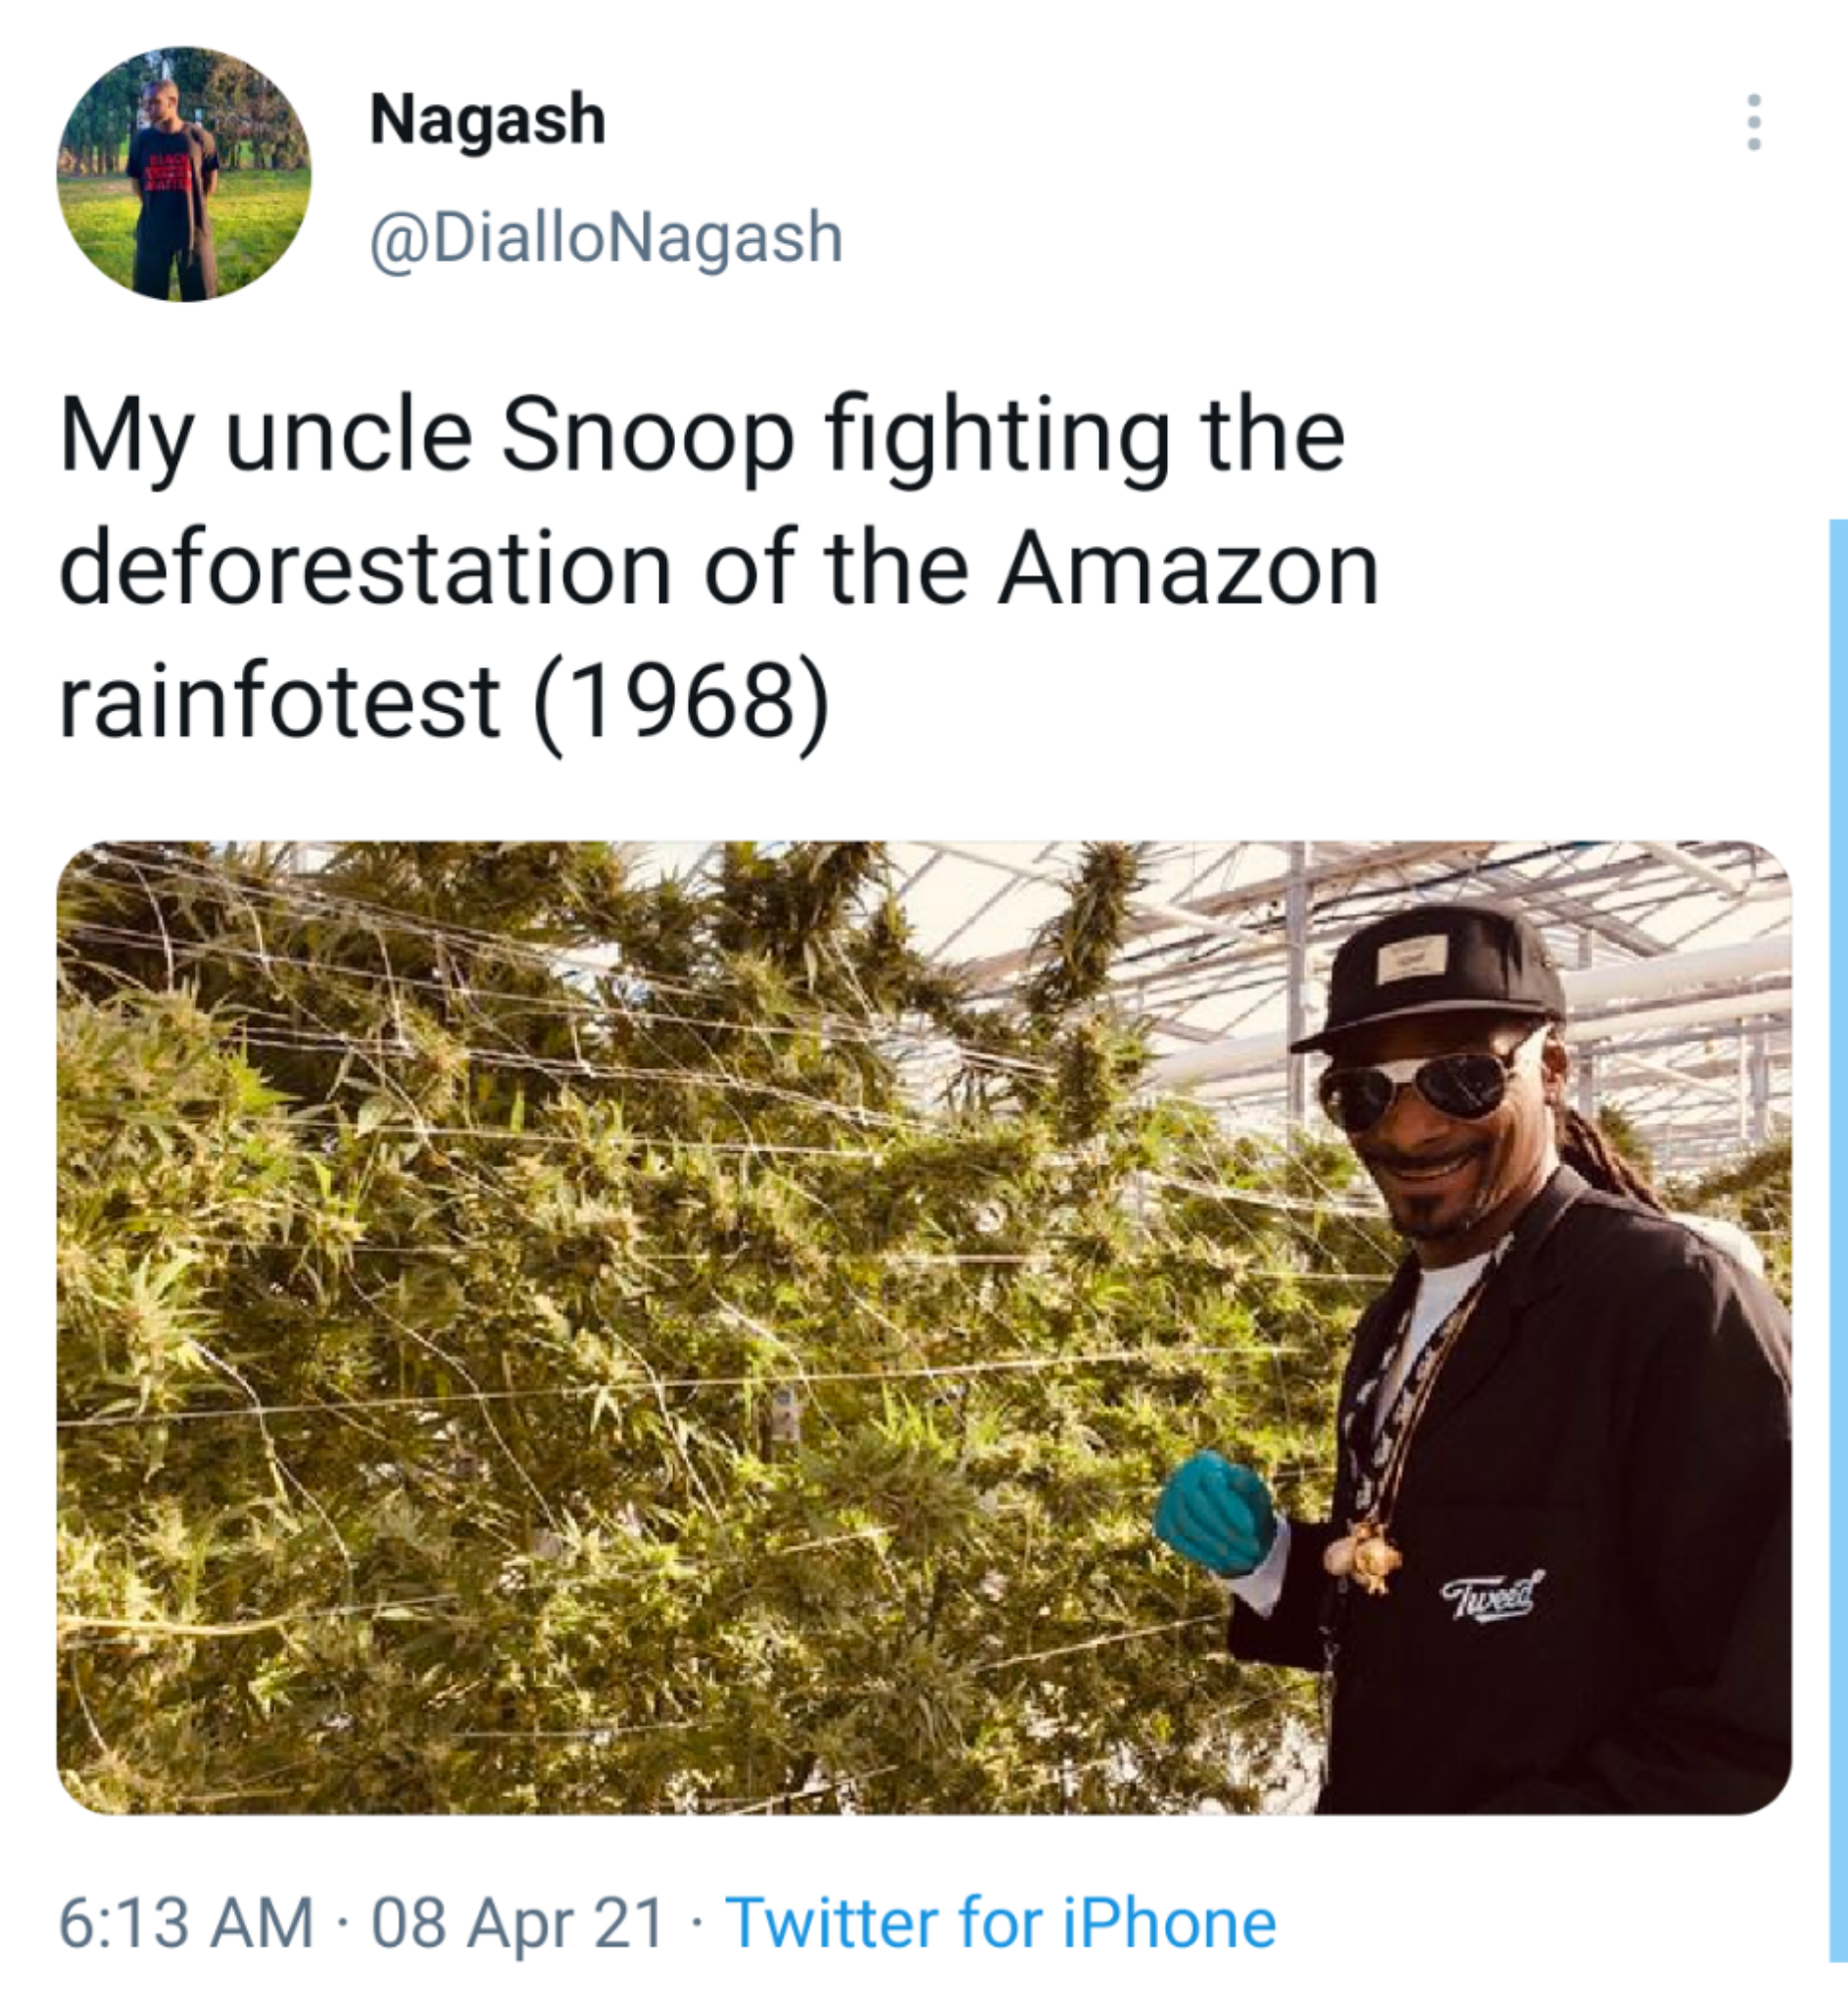 Snoop Lion doing what he can...